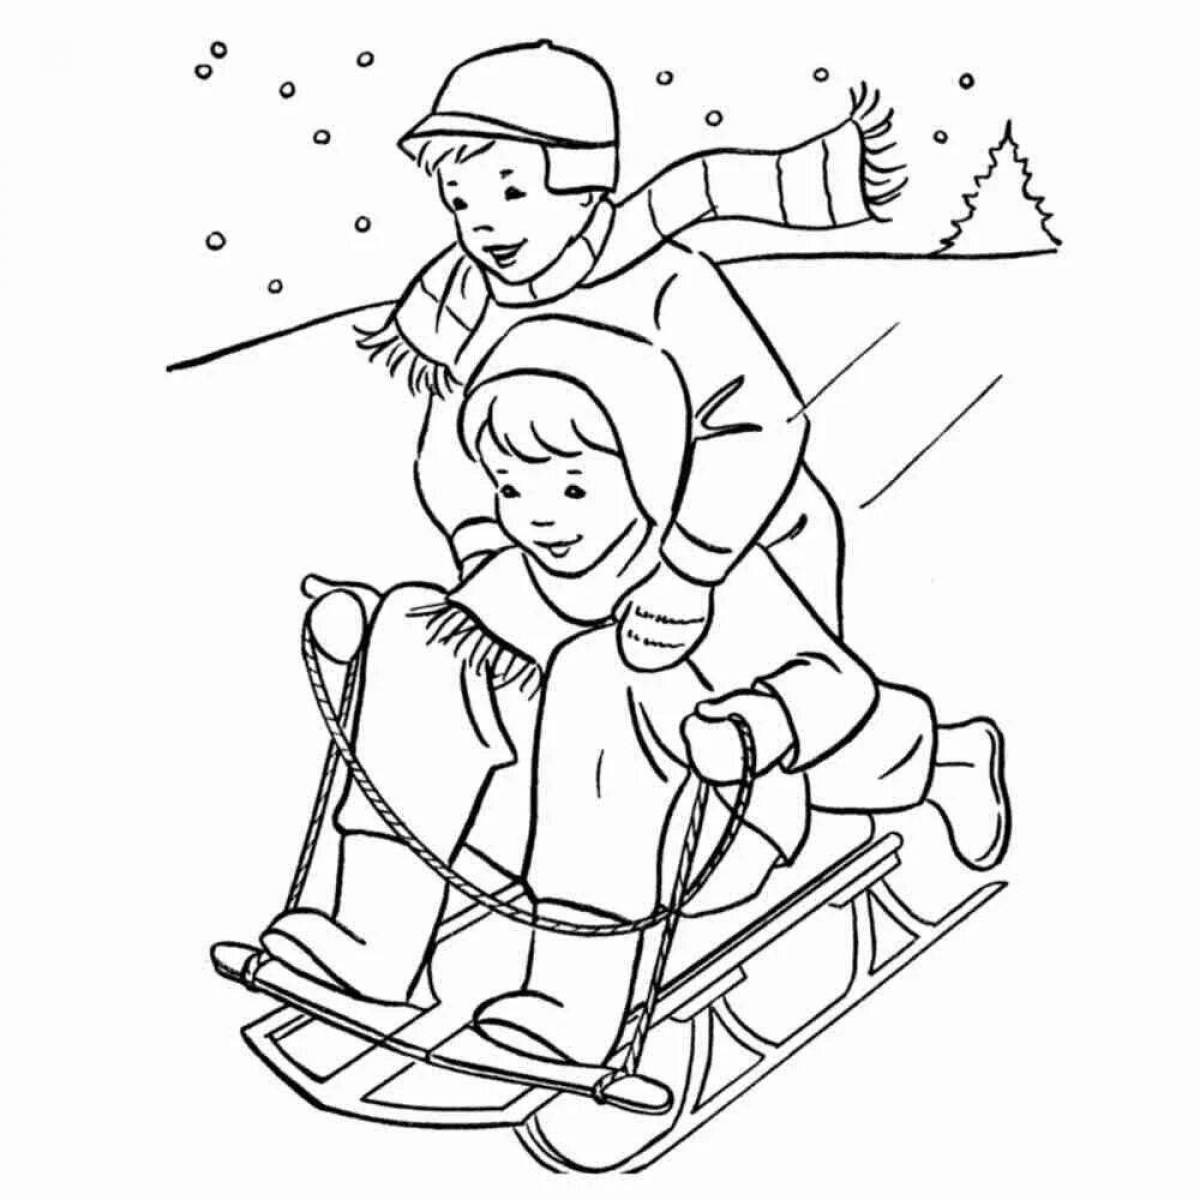 Animated sleigh coloring page for kids